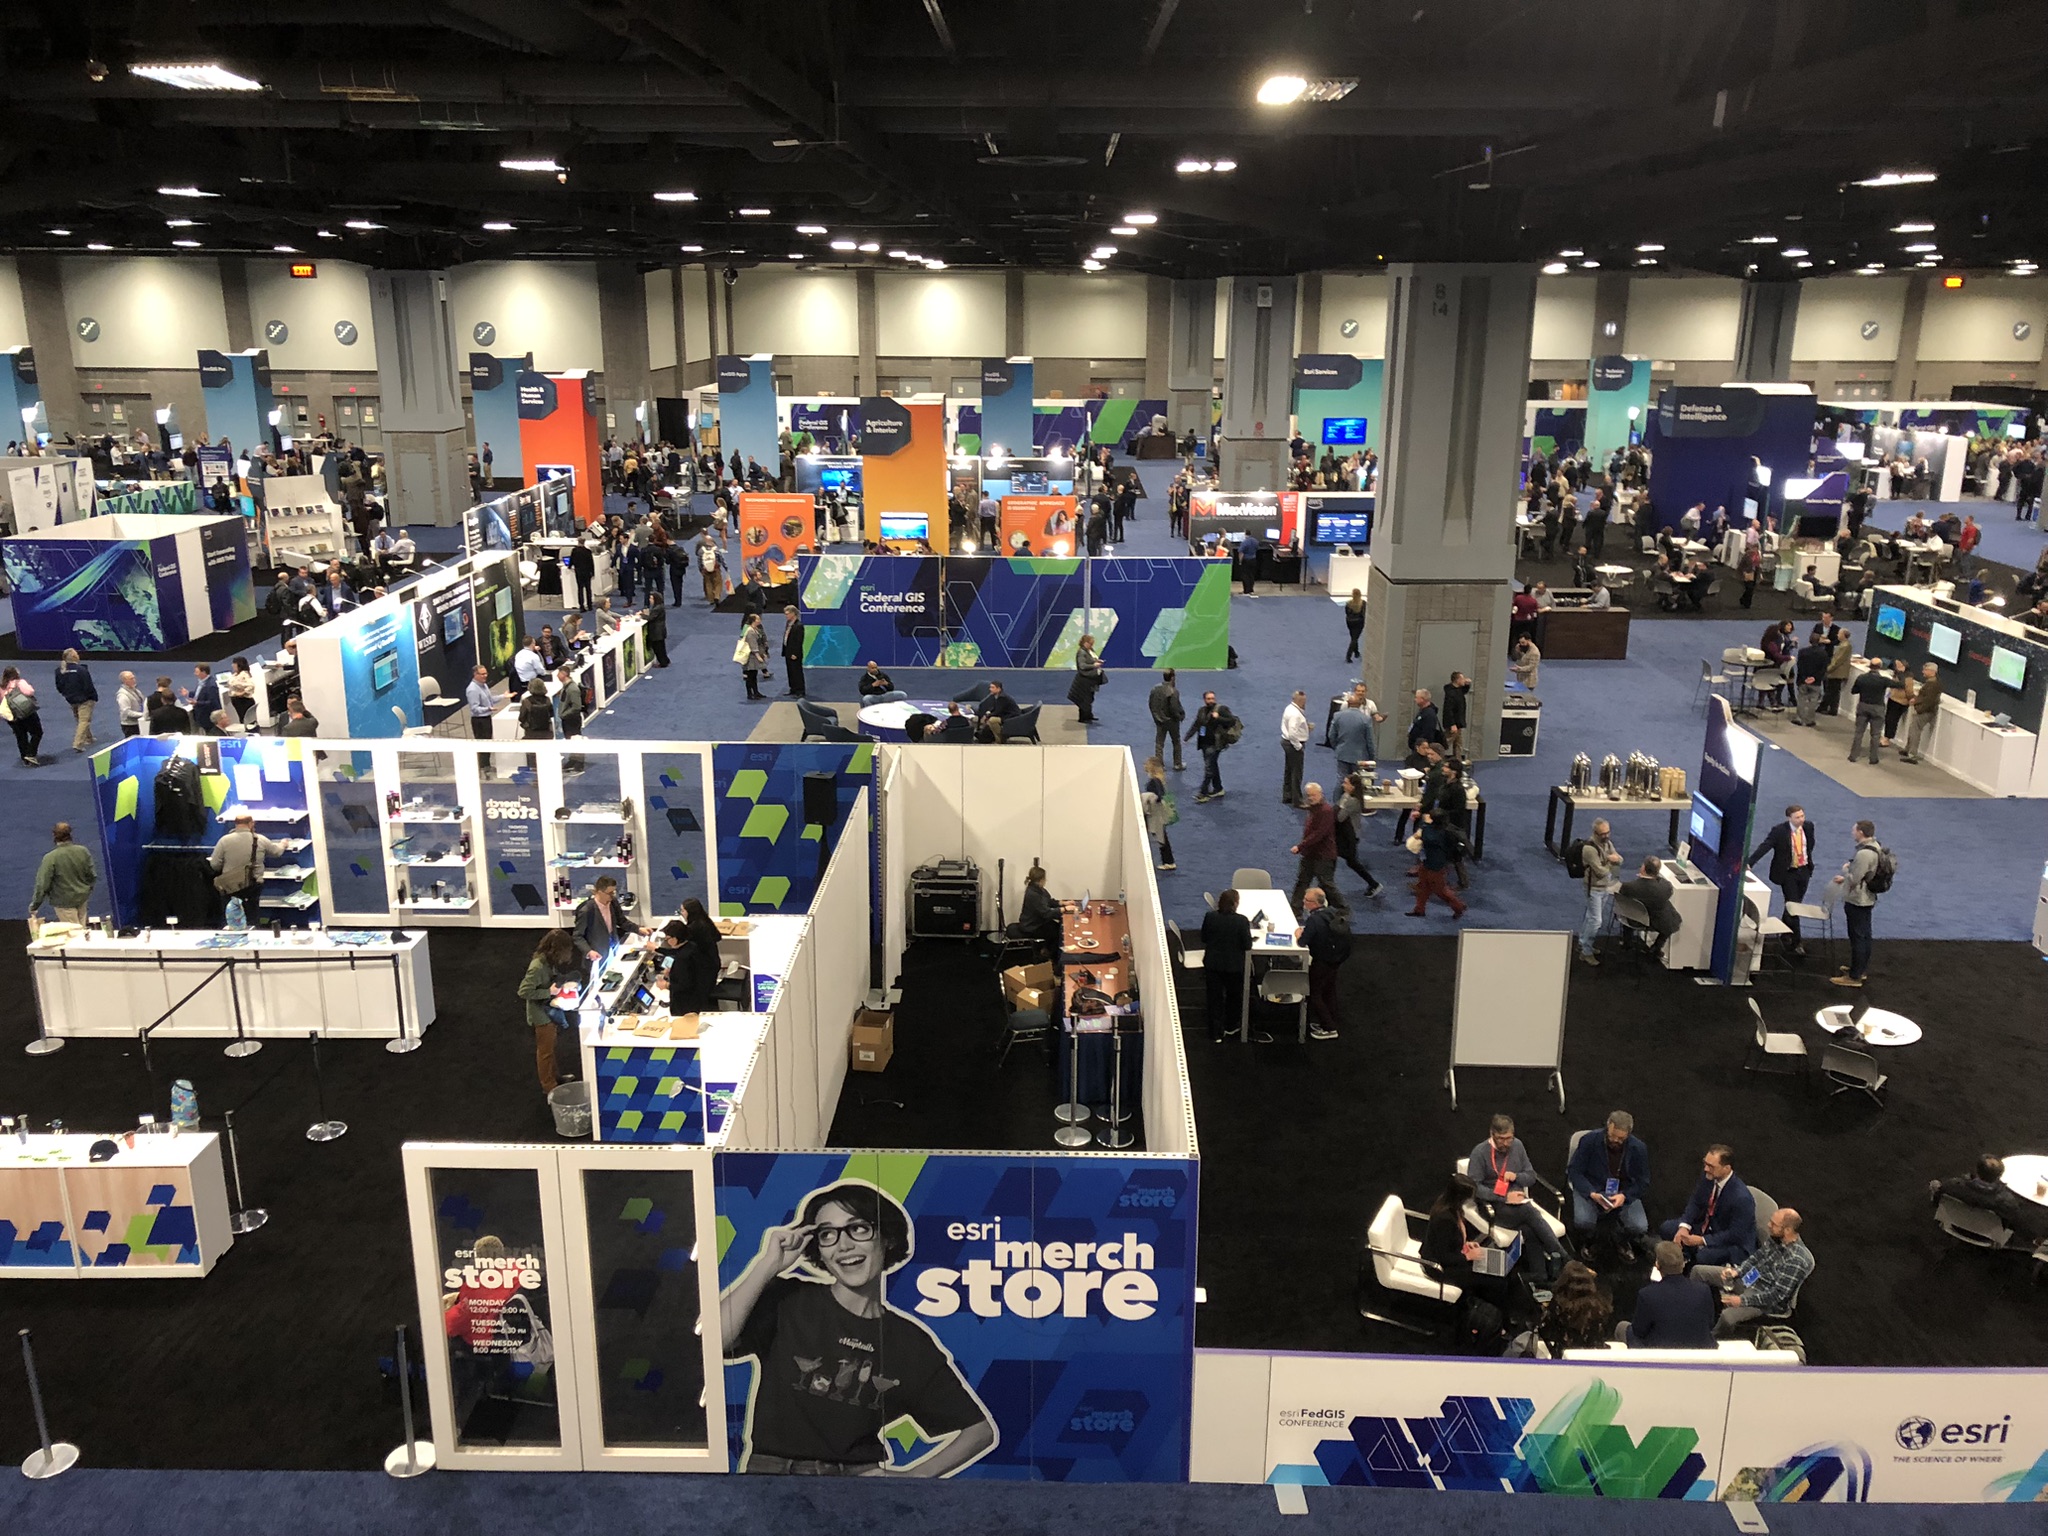 View of the Expo Floor